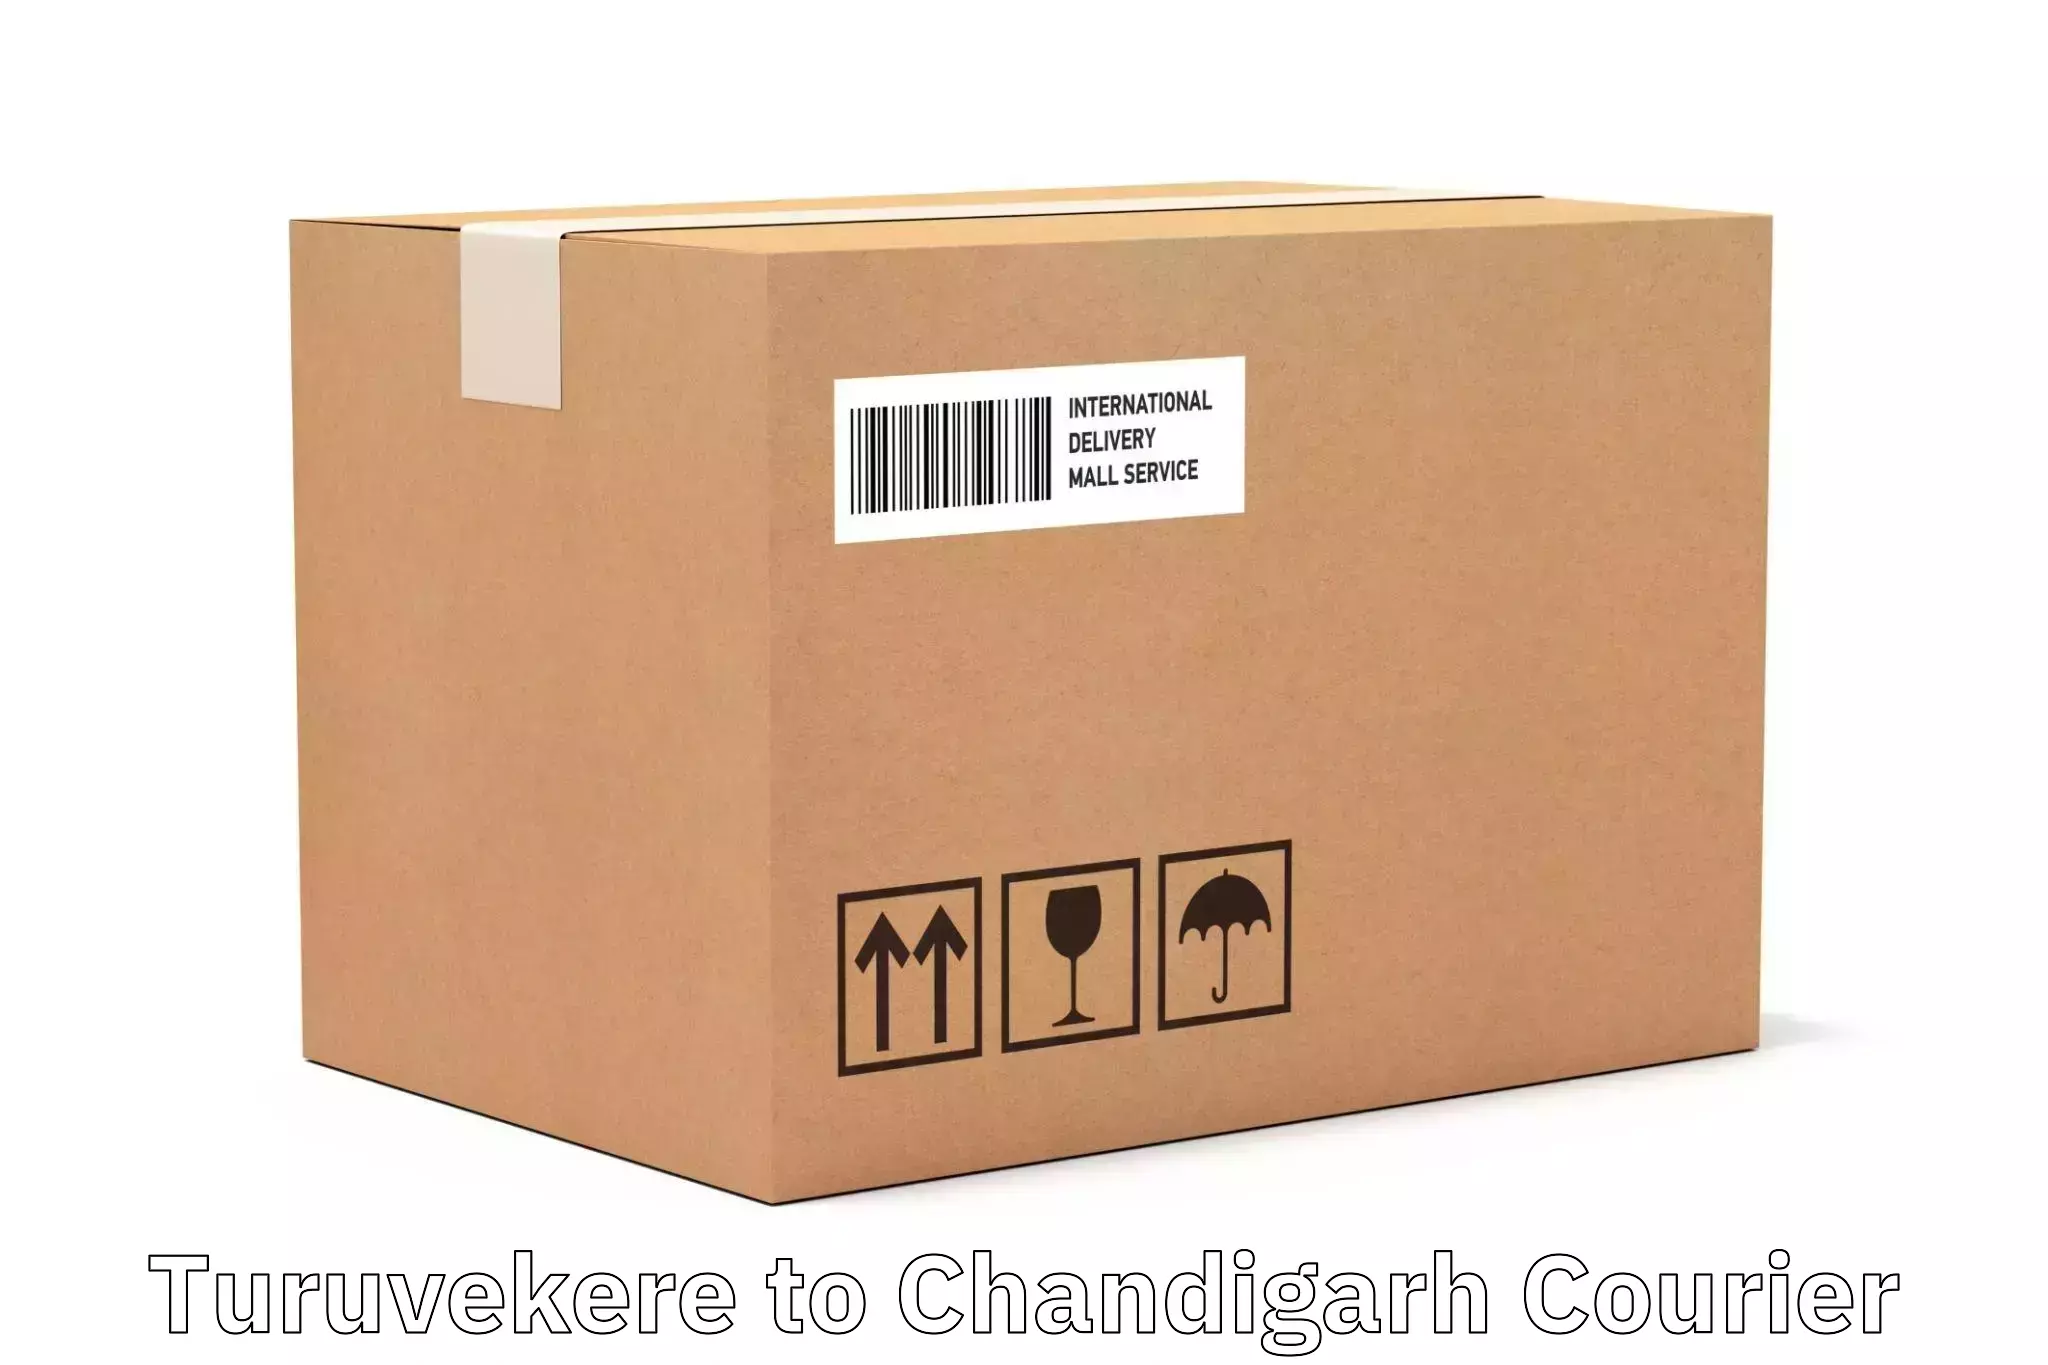 Optimized shipping routes Turuvekere to Chandigarh